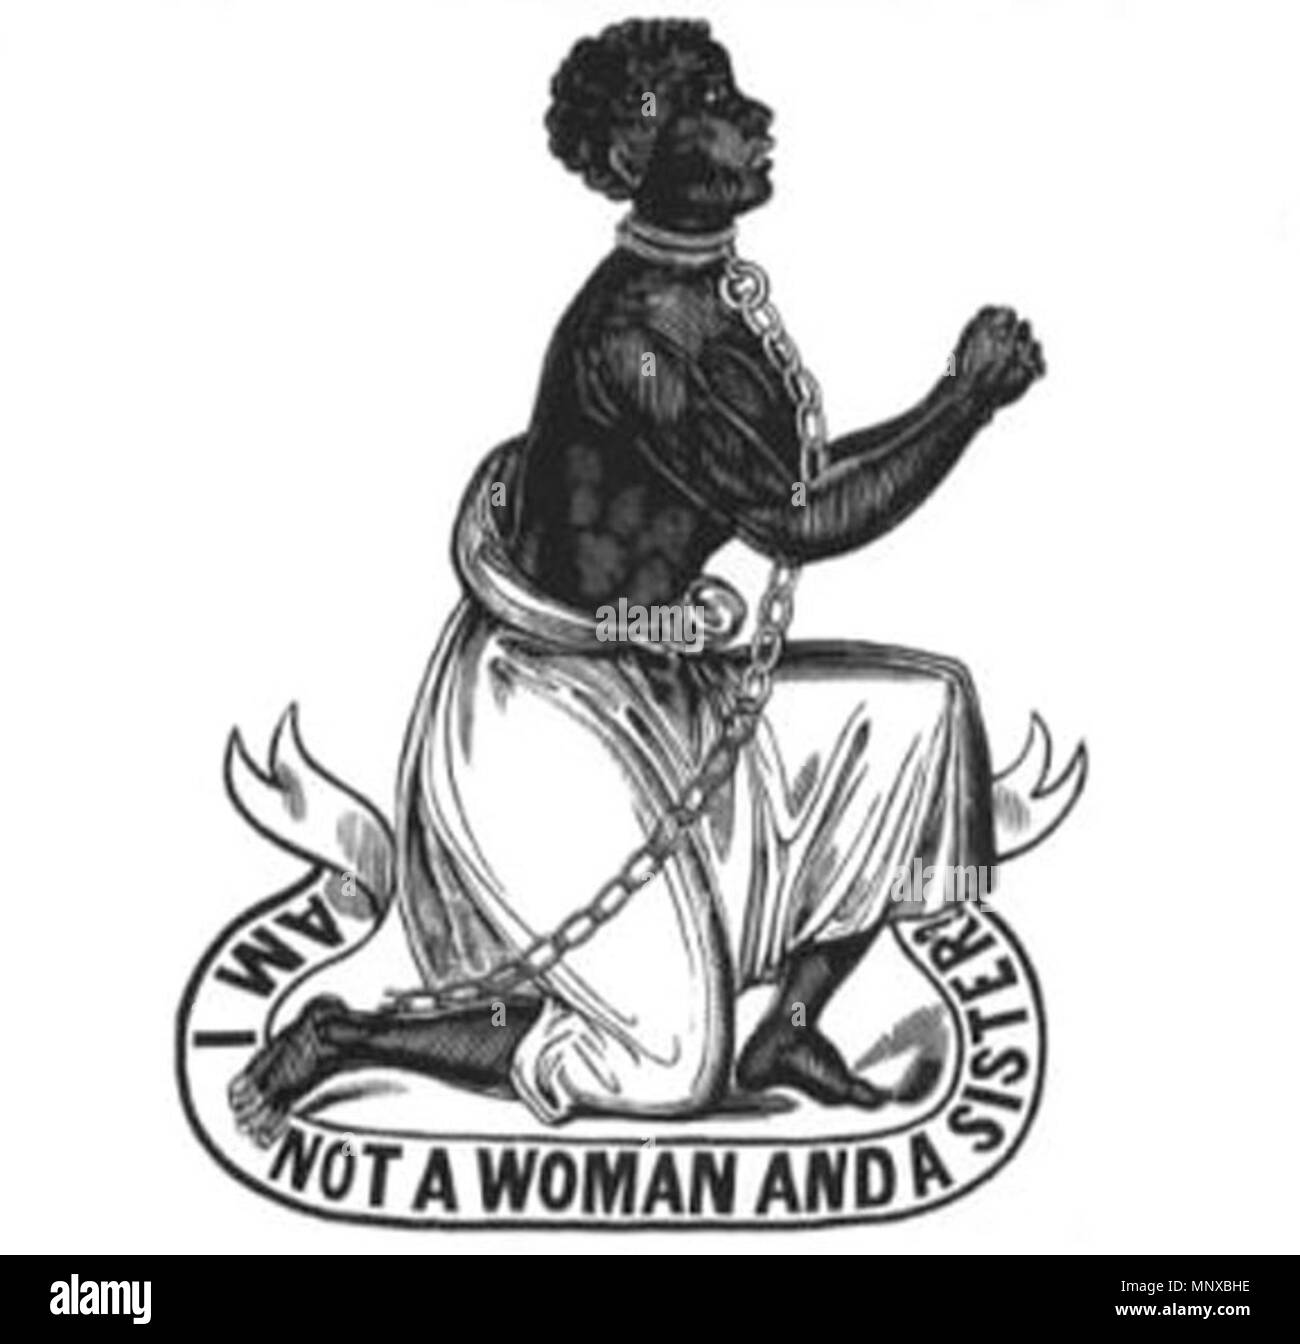 . Image of an antislavery medallion of the late 18th century, from the British Museum (female version of classic early abolitionist 'AM I NOT A MAN AND A BROTHER?' graphic). probable 19th century reproduction of 18th-century graphic; image was uploaded on '19:42, 28 March 2006' to en.wikipedia. Unknown; uploaded by en:User:Dumarest to en.wikipedia 1126 SisterSlave Stock Photo